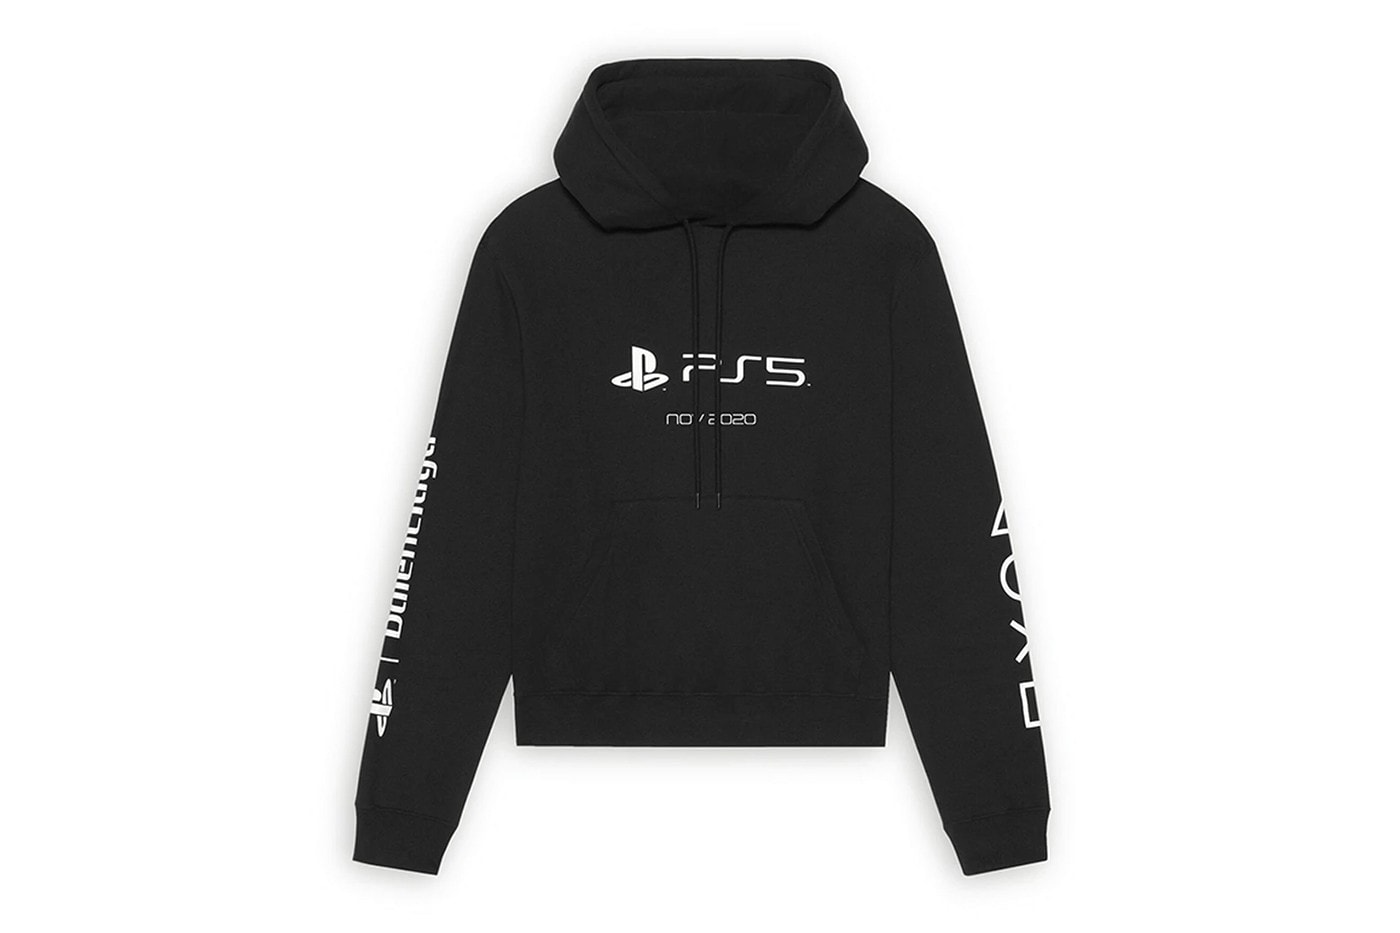 Sony PlayStation 5 x Balenciaga Capsule Release Gaming Hoodies T-Shirts Black White Red